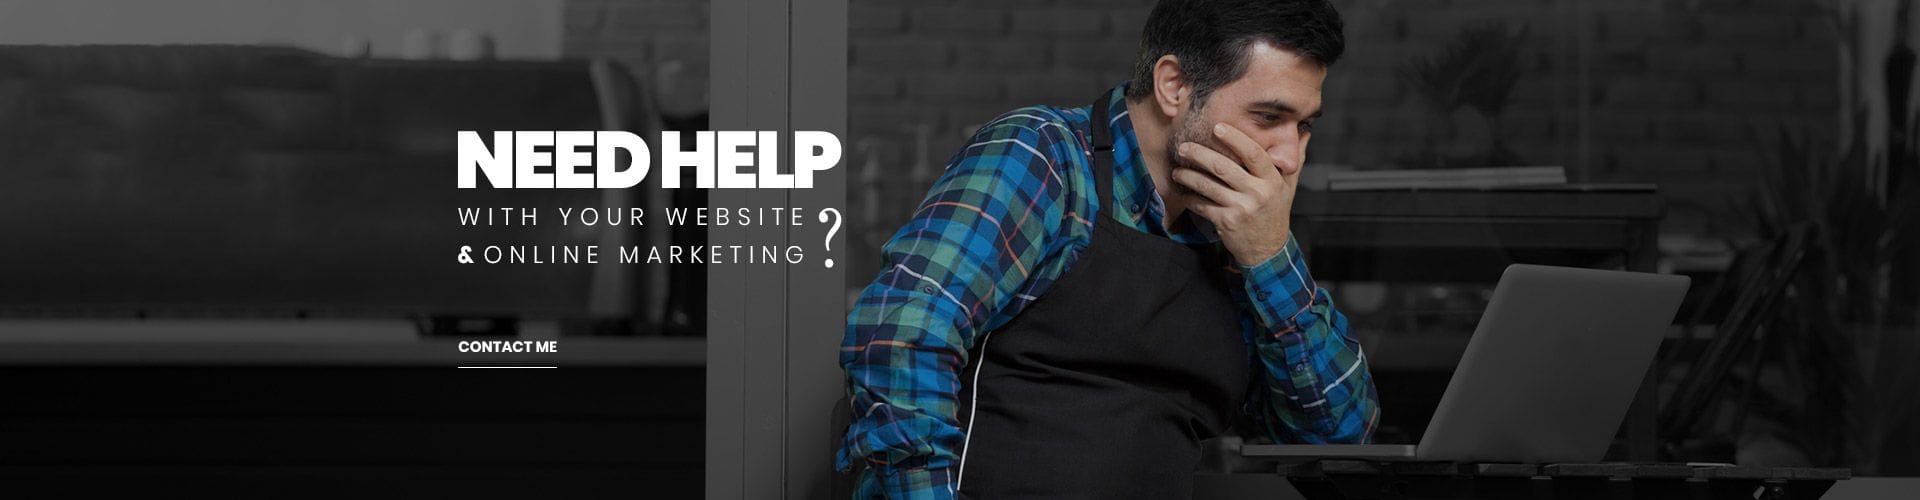 Need help with your website & online marketing?